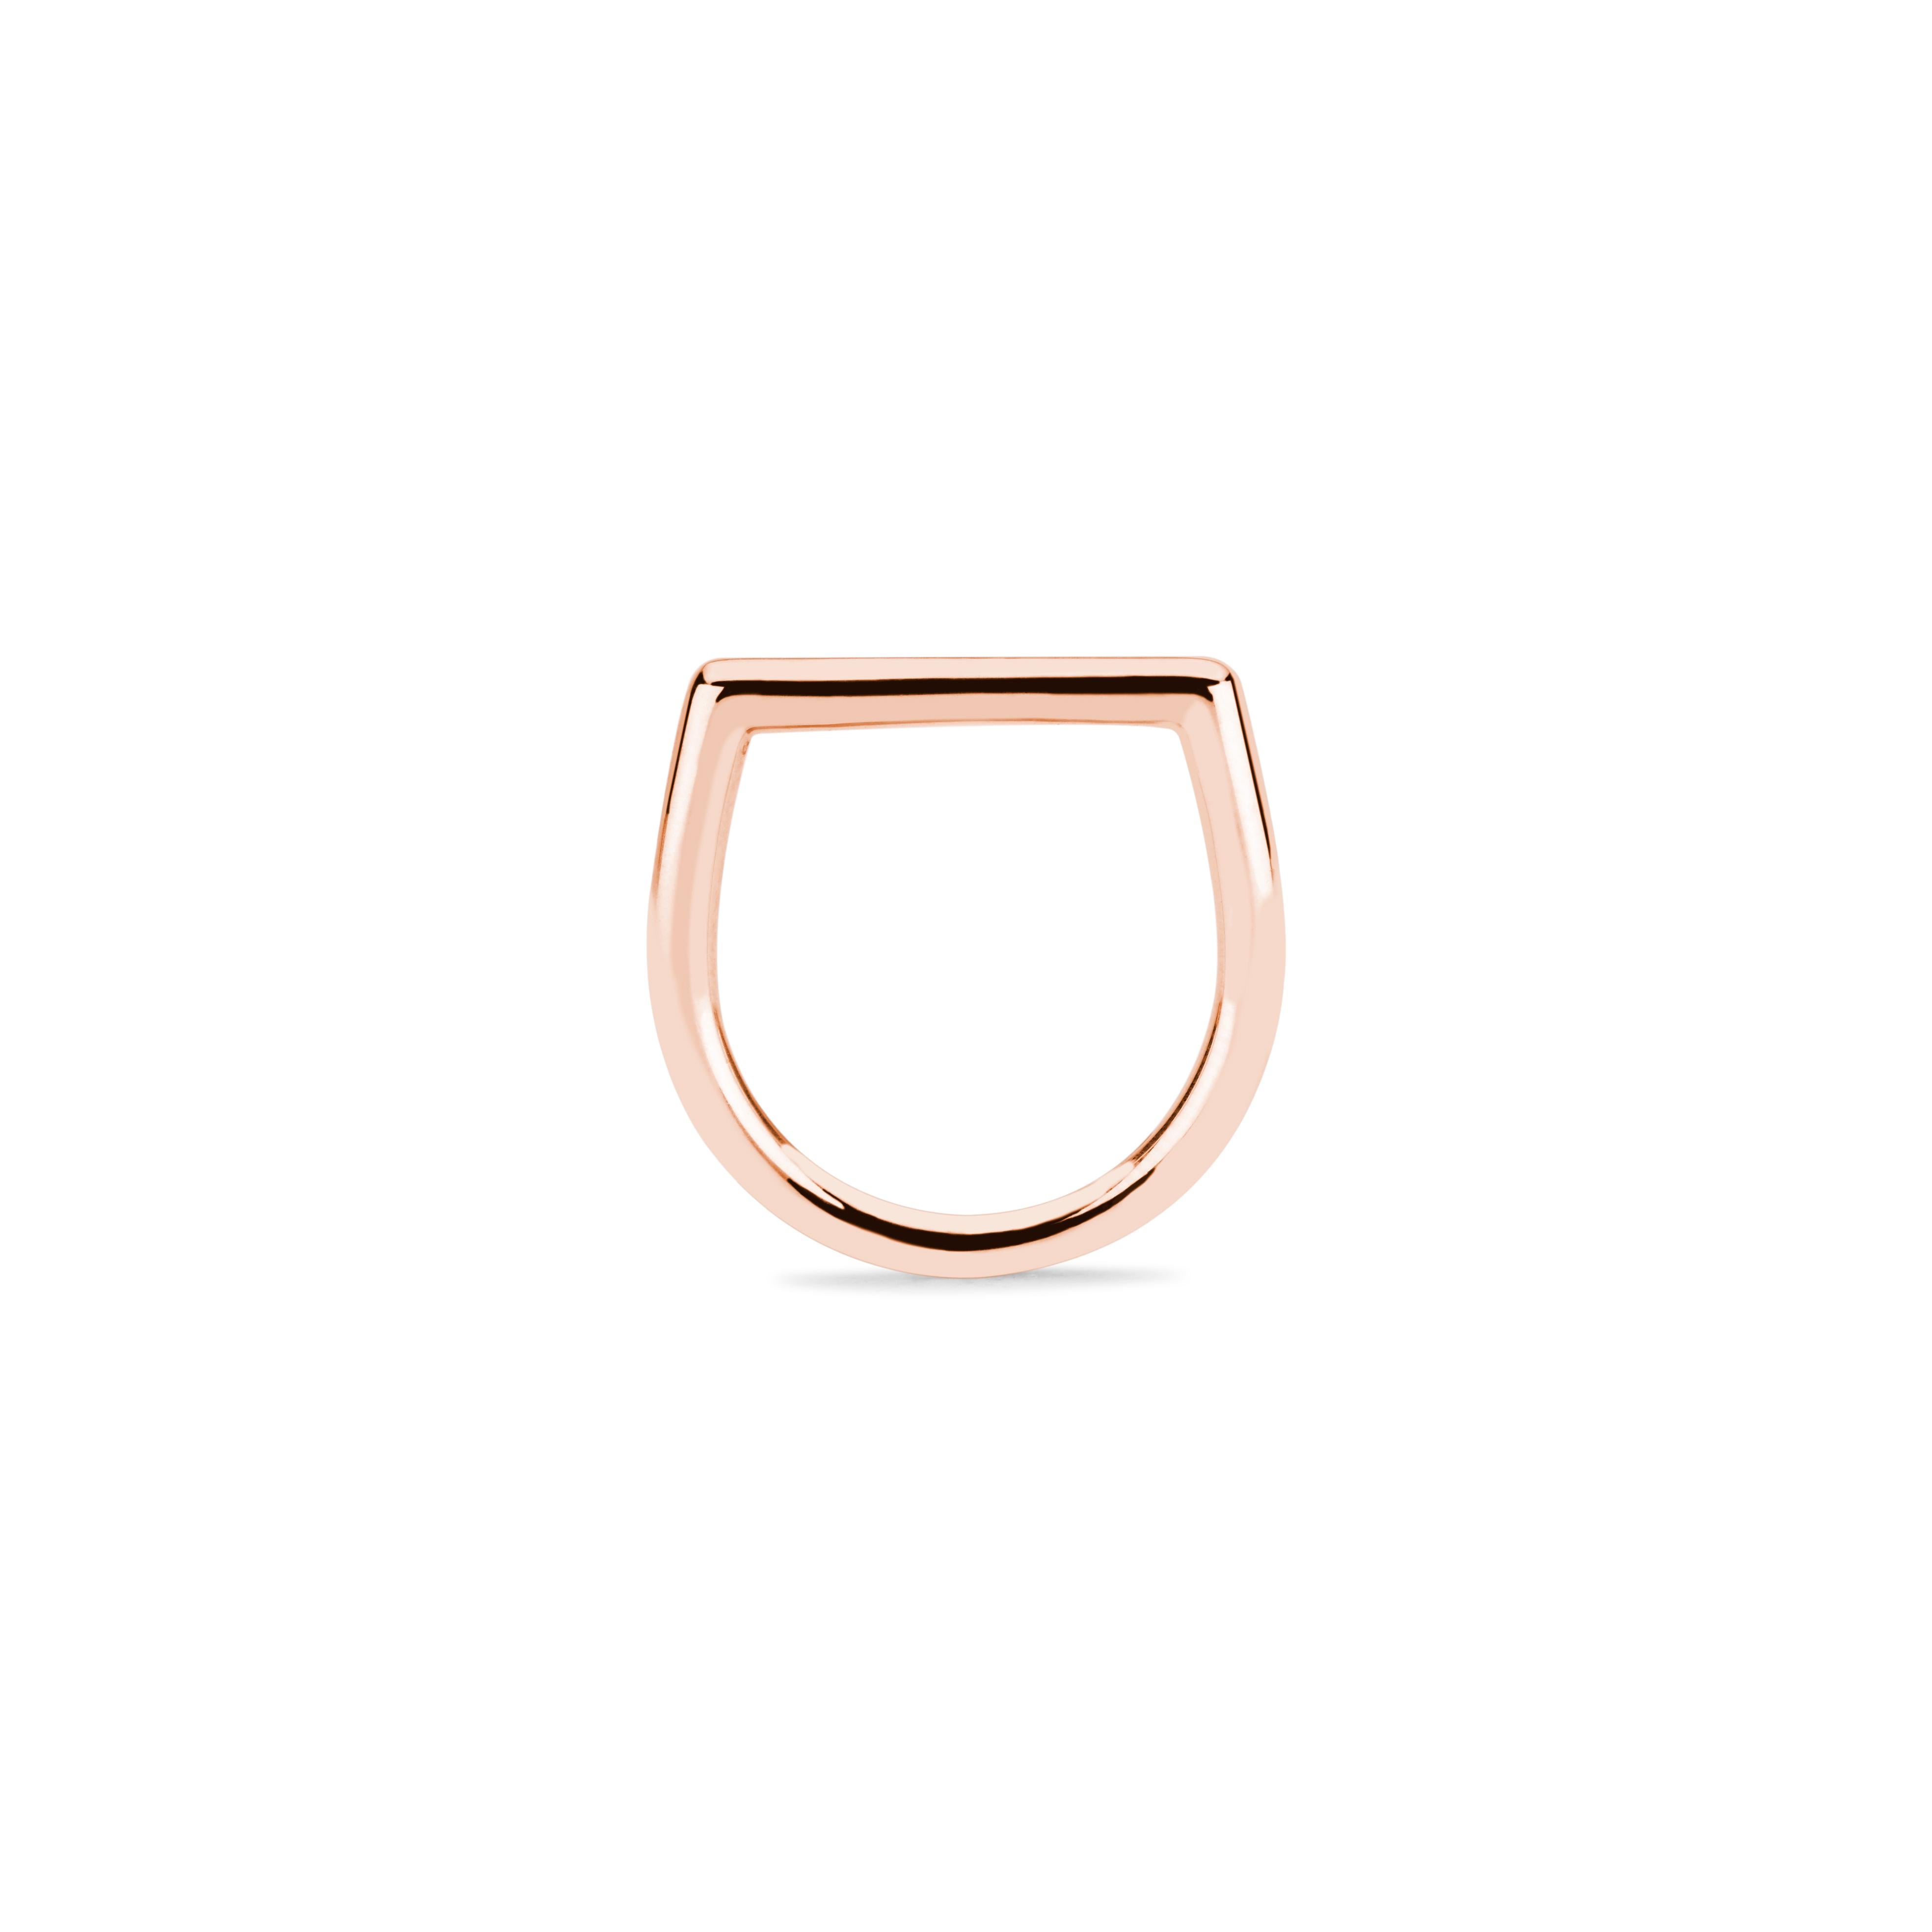 Unique in its shape and style, this 14k rose gold ring is meant to be stacked with other rings, but it is solid enough to stand alone. Comfortable and easy to wear, the shape allows for flexible fitting across fingers.

This ring can be made in all